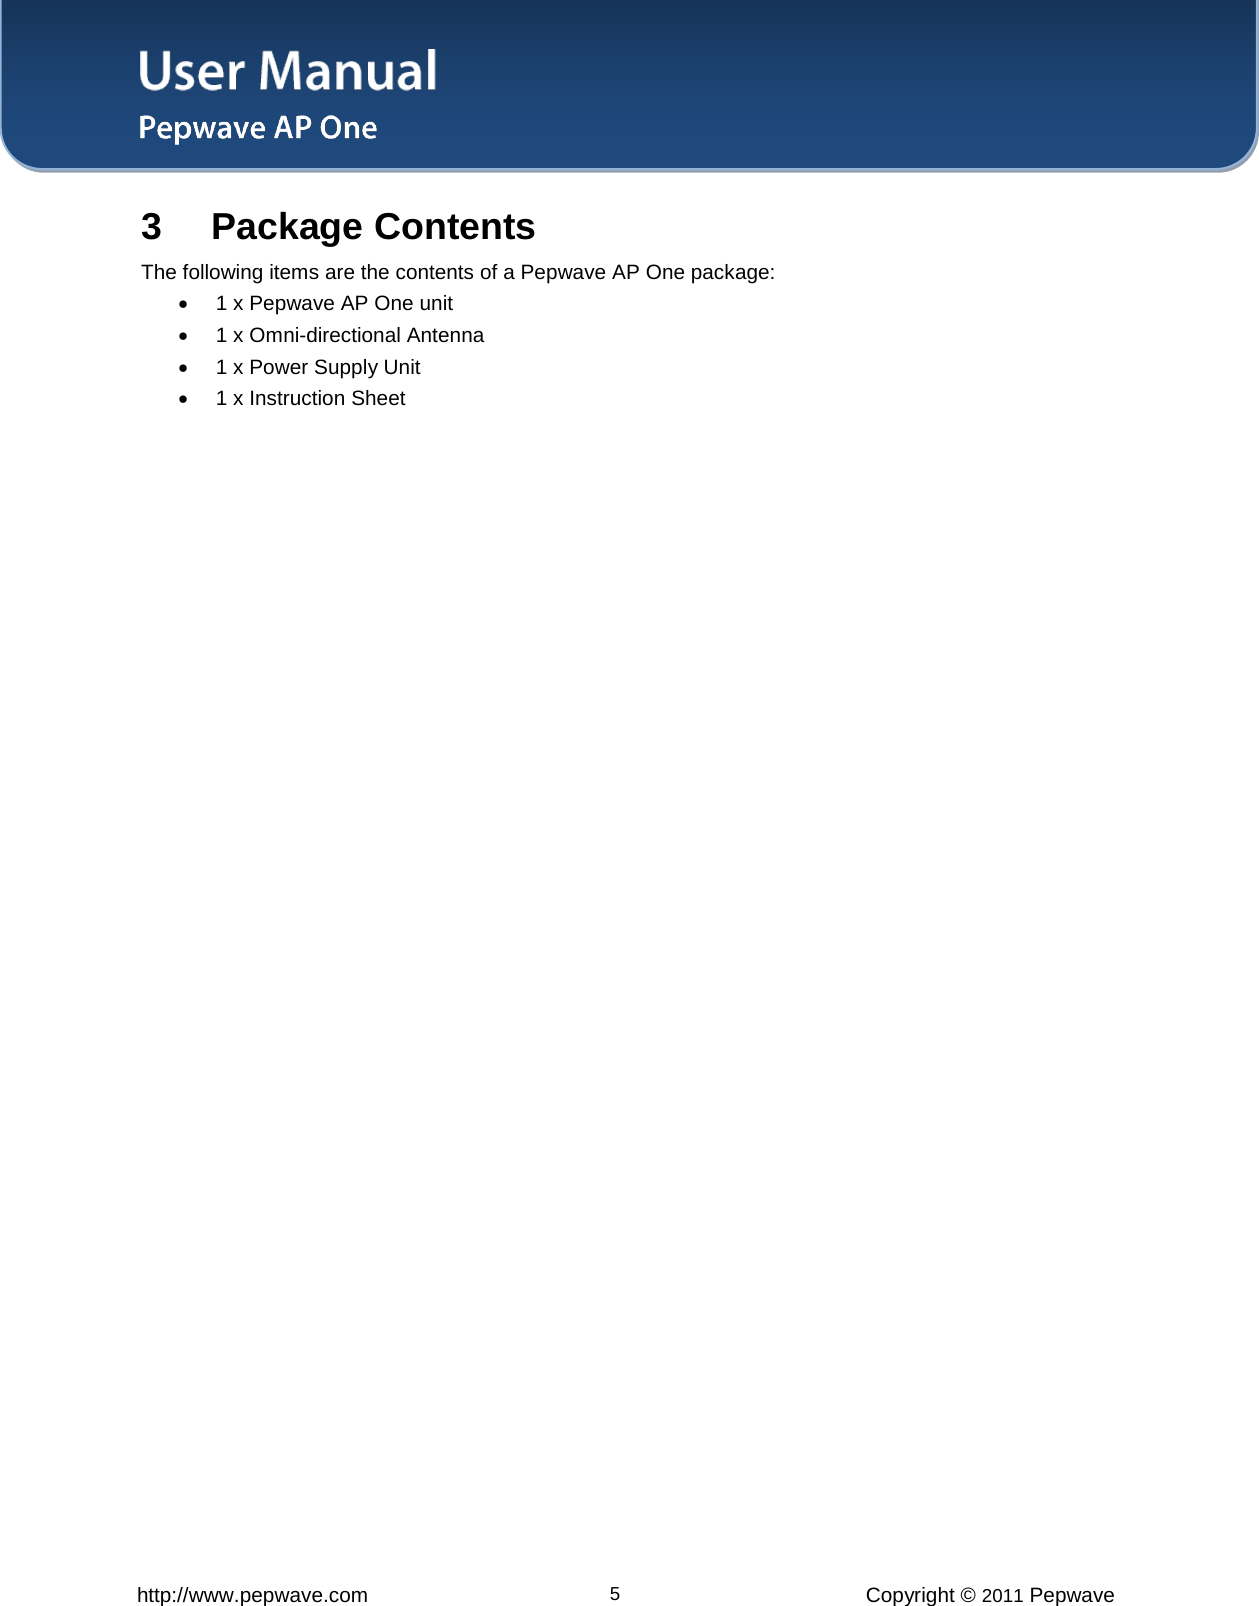 User Manual   http://www.pepwave.com 5 Copyright © 2011 Pepwave  3 Package Contents The following items are the contents of a Pepwave AP One package:  • 1 x Pepwave AP One unit  • 1 x Omni-directional Antenna  • 1 x Power Supply Unit • 1 x Instruction Sheet  